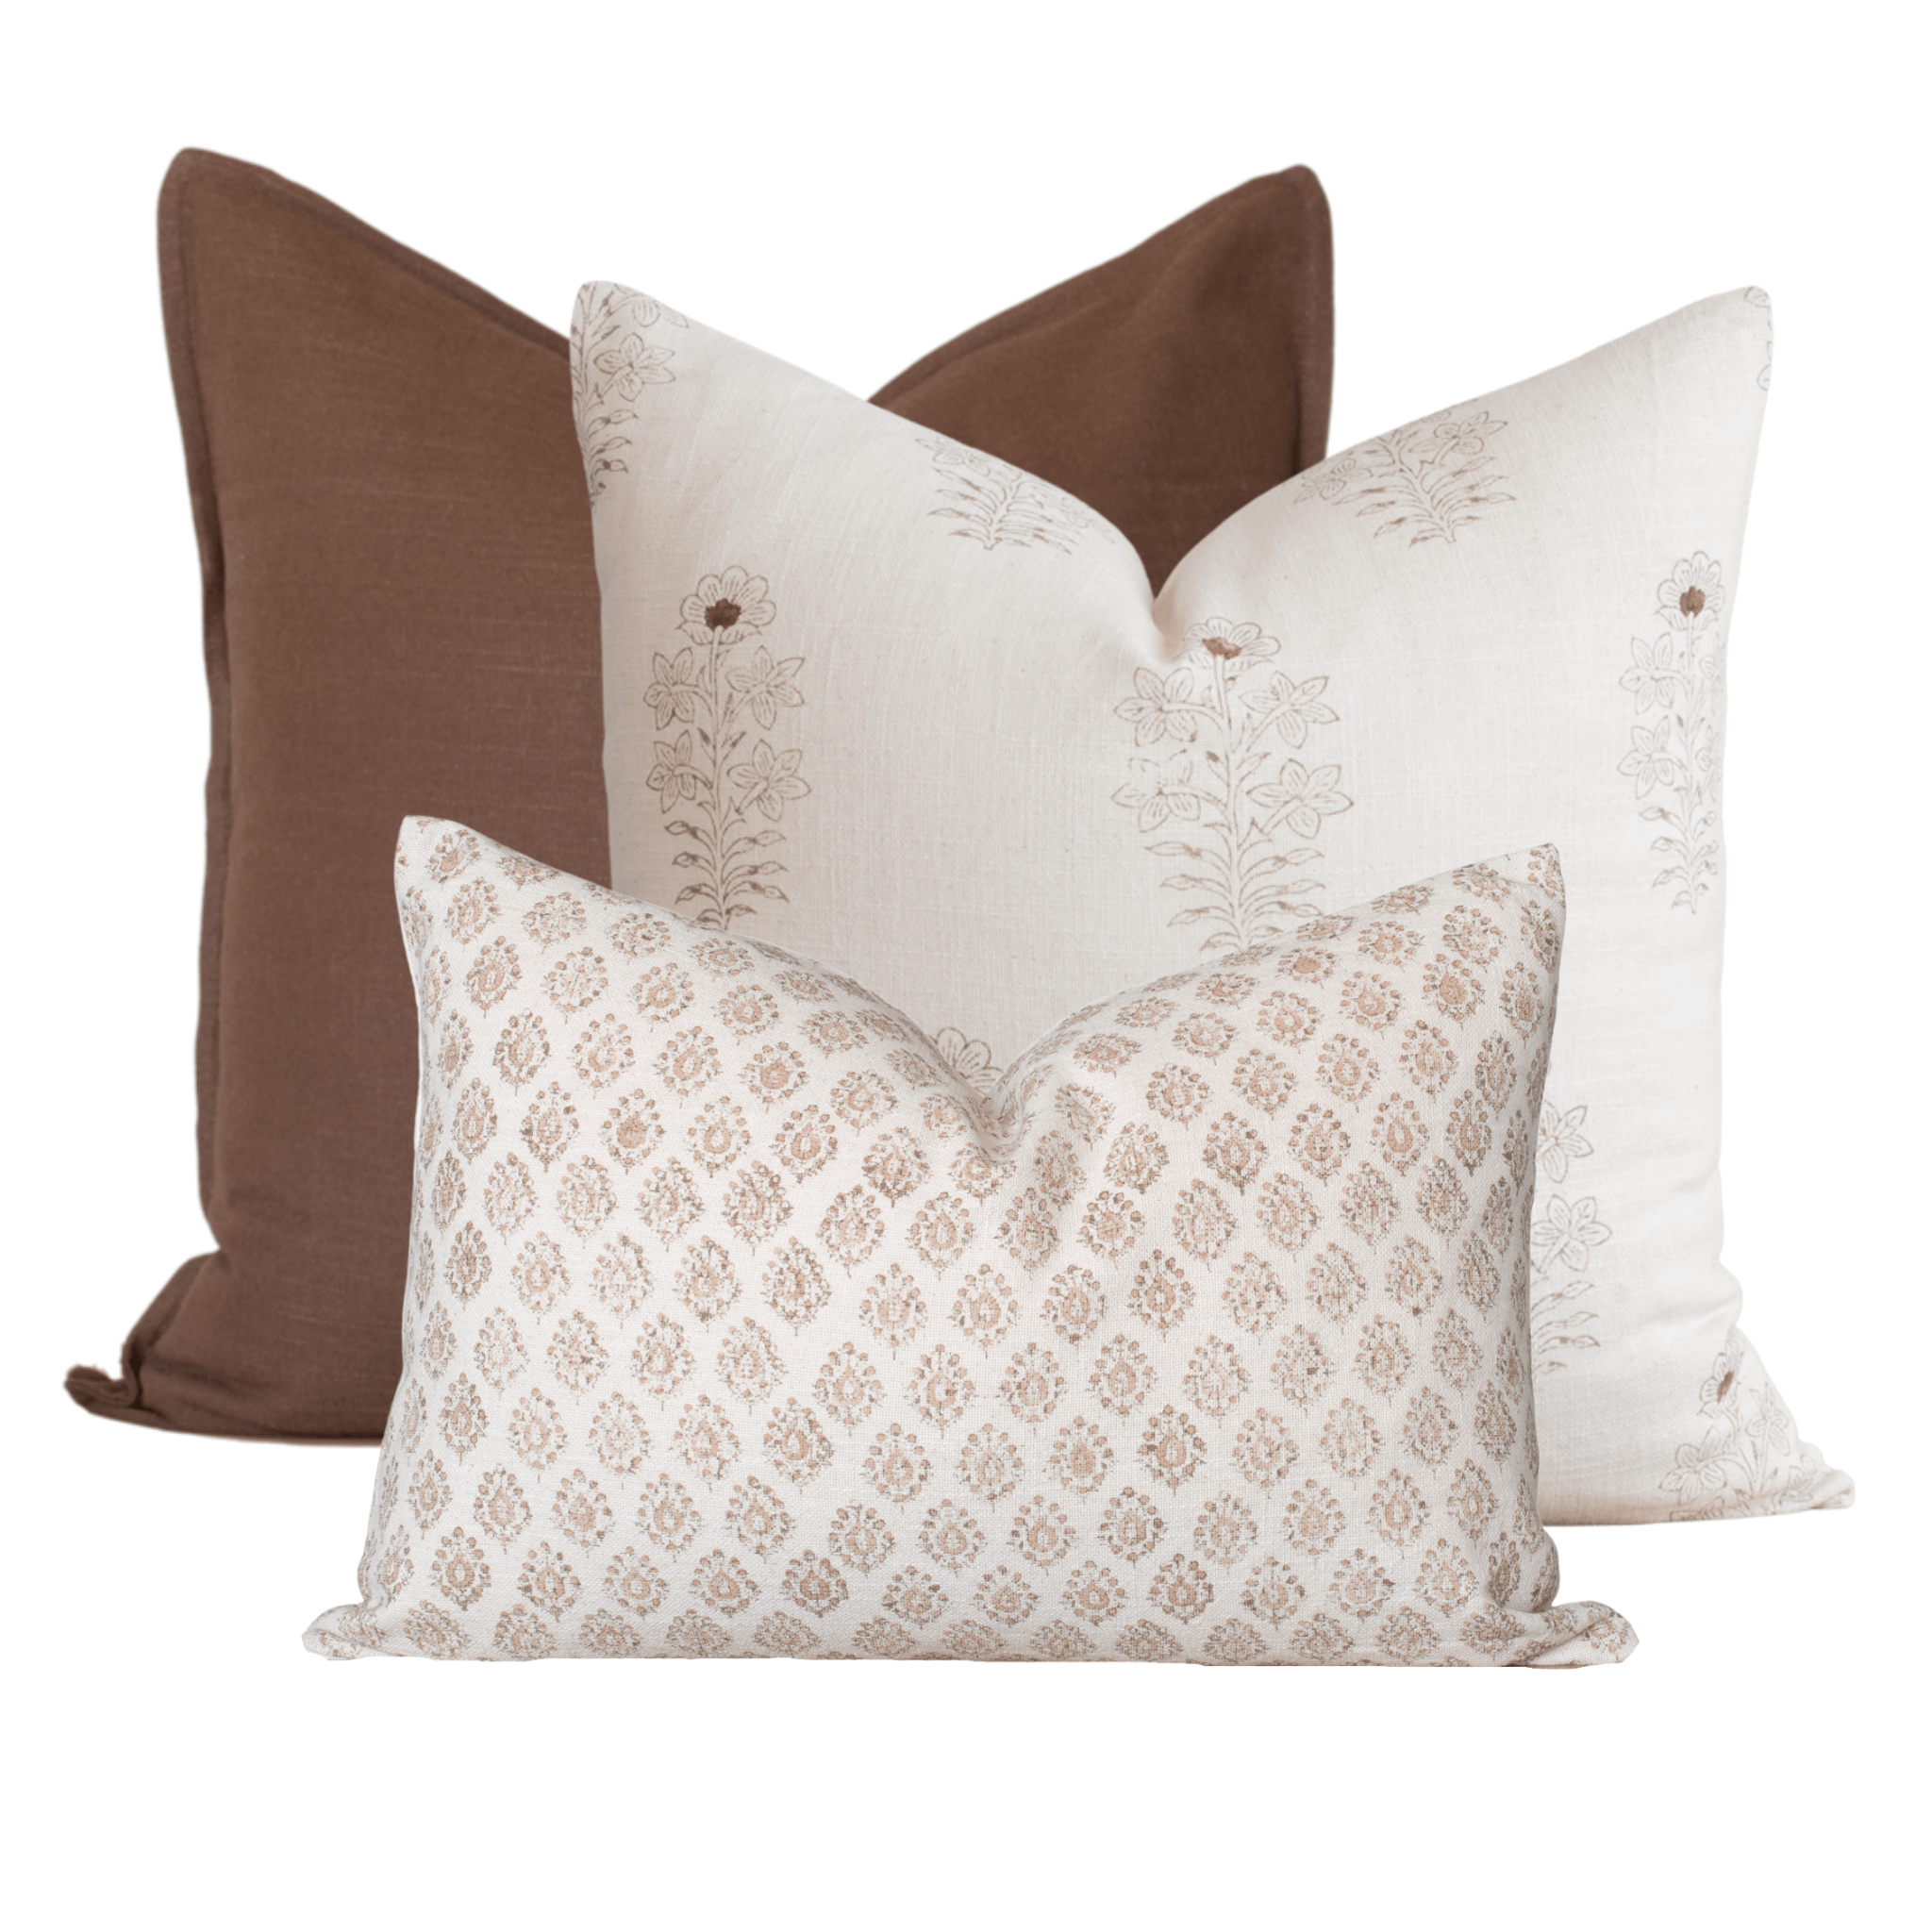 Throw Pillow Cover Sets  Bed, Couch Pillow Combinations – Apartment No.3